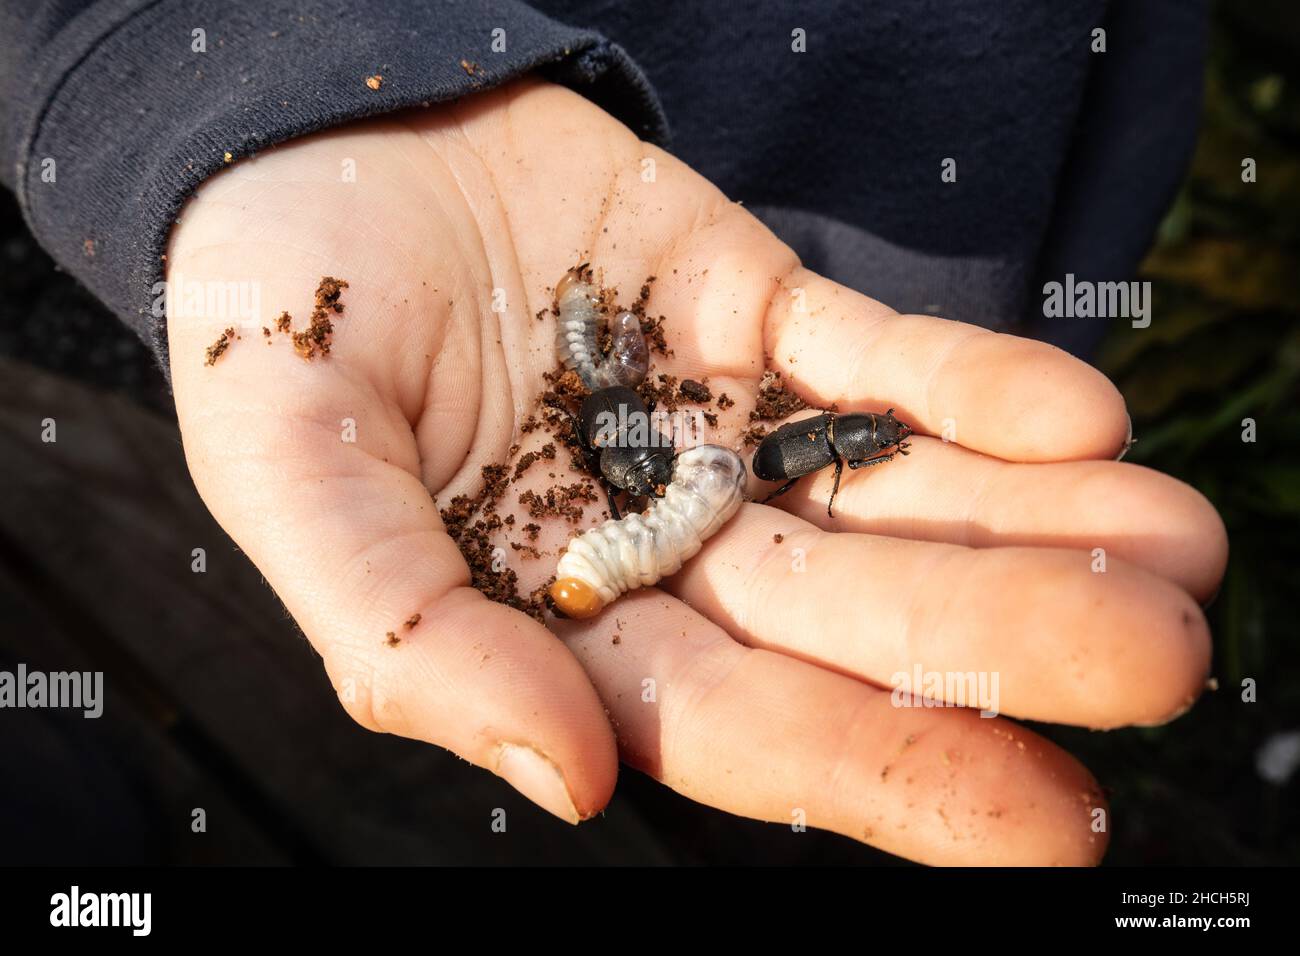 Children investigating a 'beetle bucket' containing lesser stag beetle adults and larvae, England, UK. Stock Photo